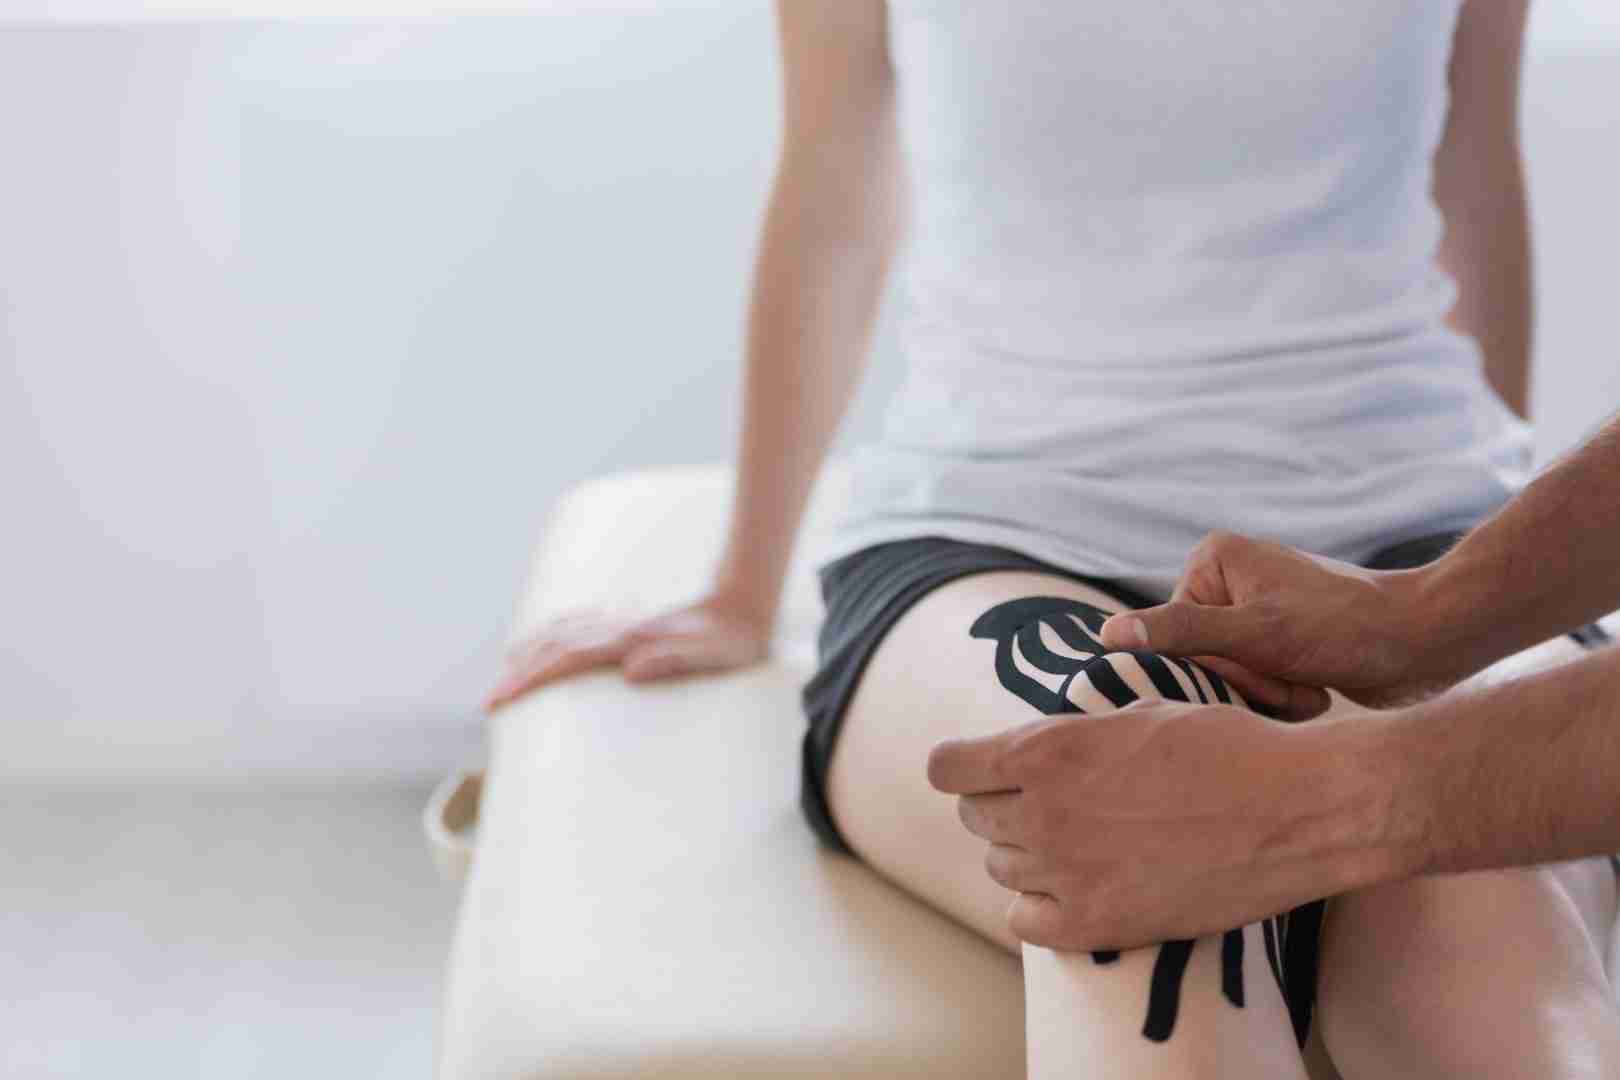 A person sitting on an examination table at Austin Manual Therapy Associates is being treated with kinesiology tape applied to their knee by another person. The individual receiving the treatment is wearing a white tank top and black shorts.